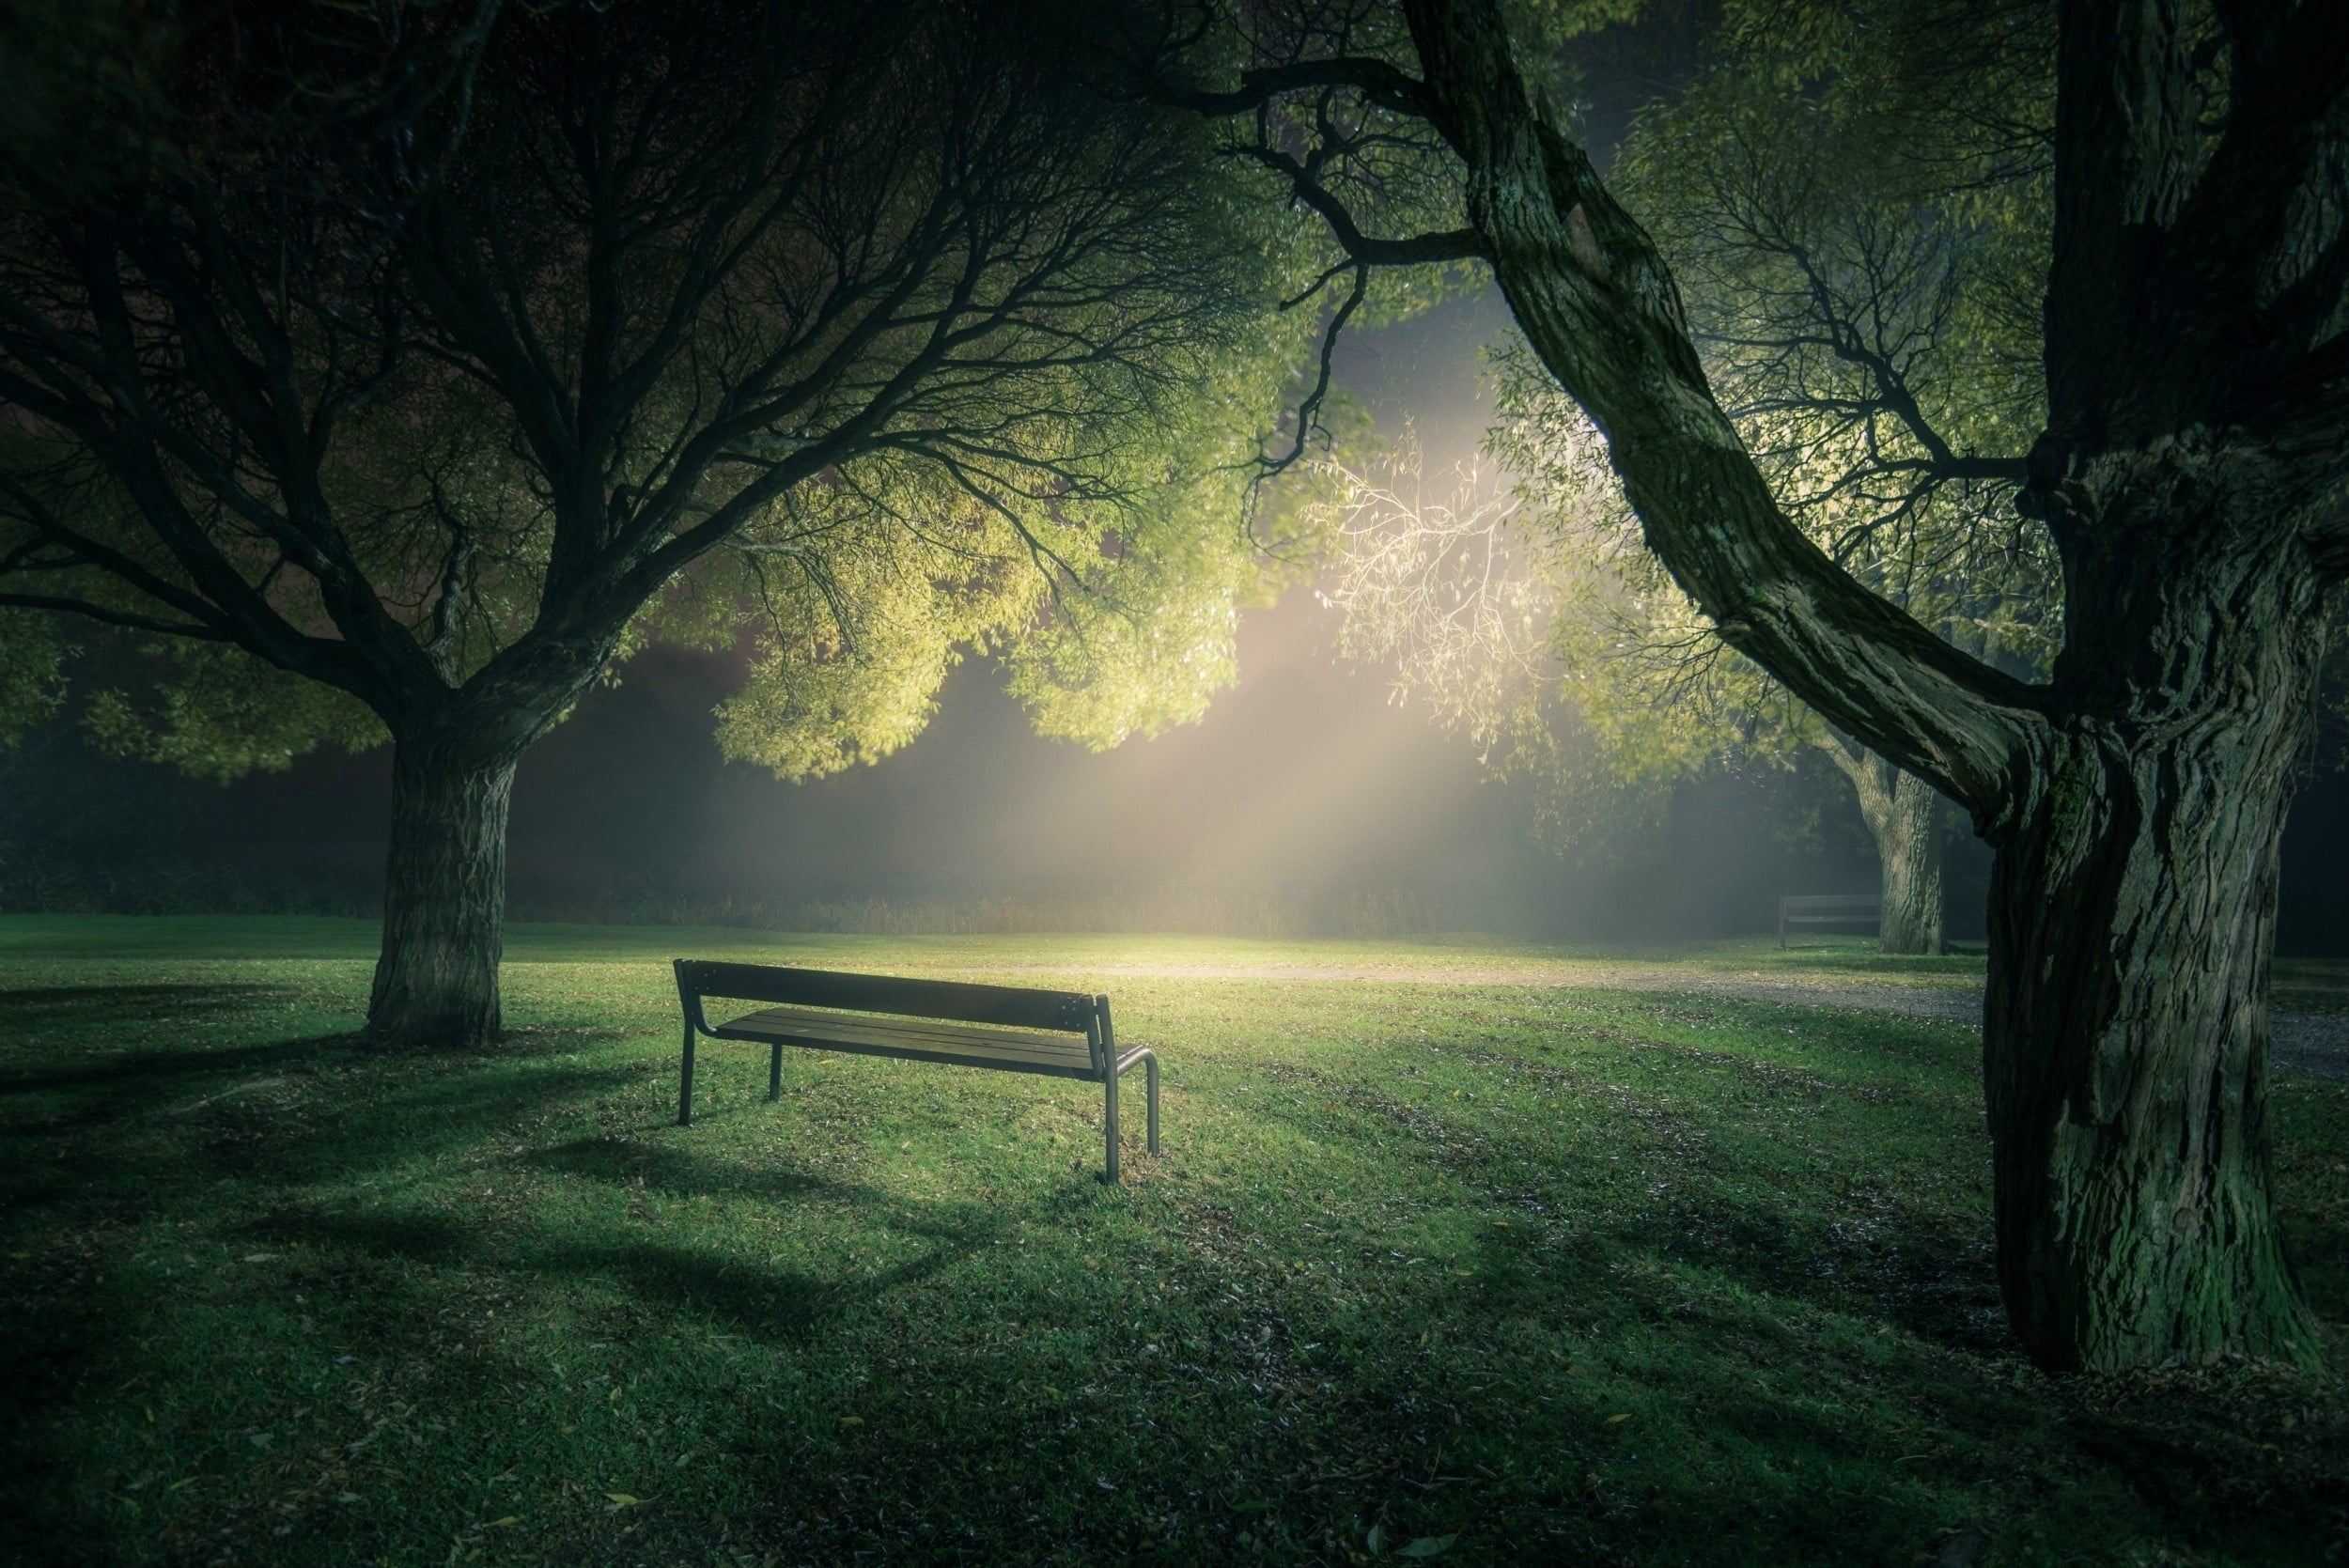 brown wooden bench, park, lawns, trees, nature